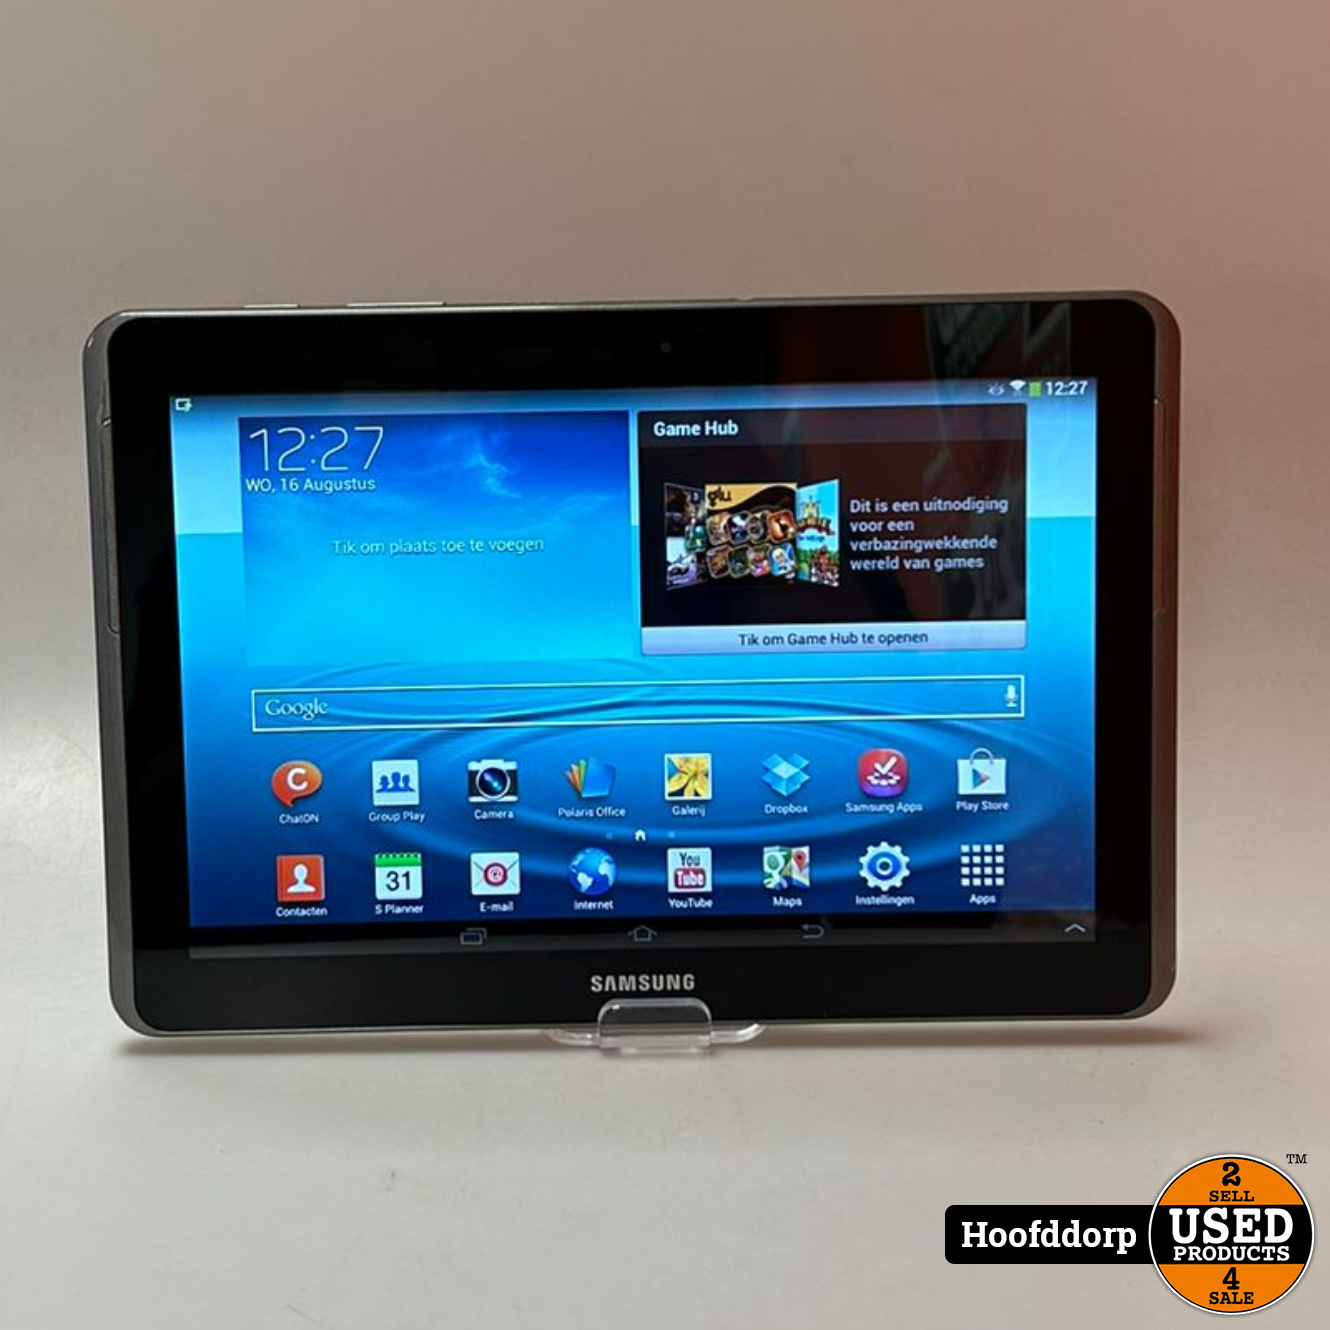 Samsung tab 2 - Used Products Hoofddorp